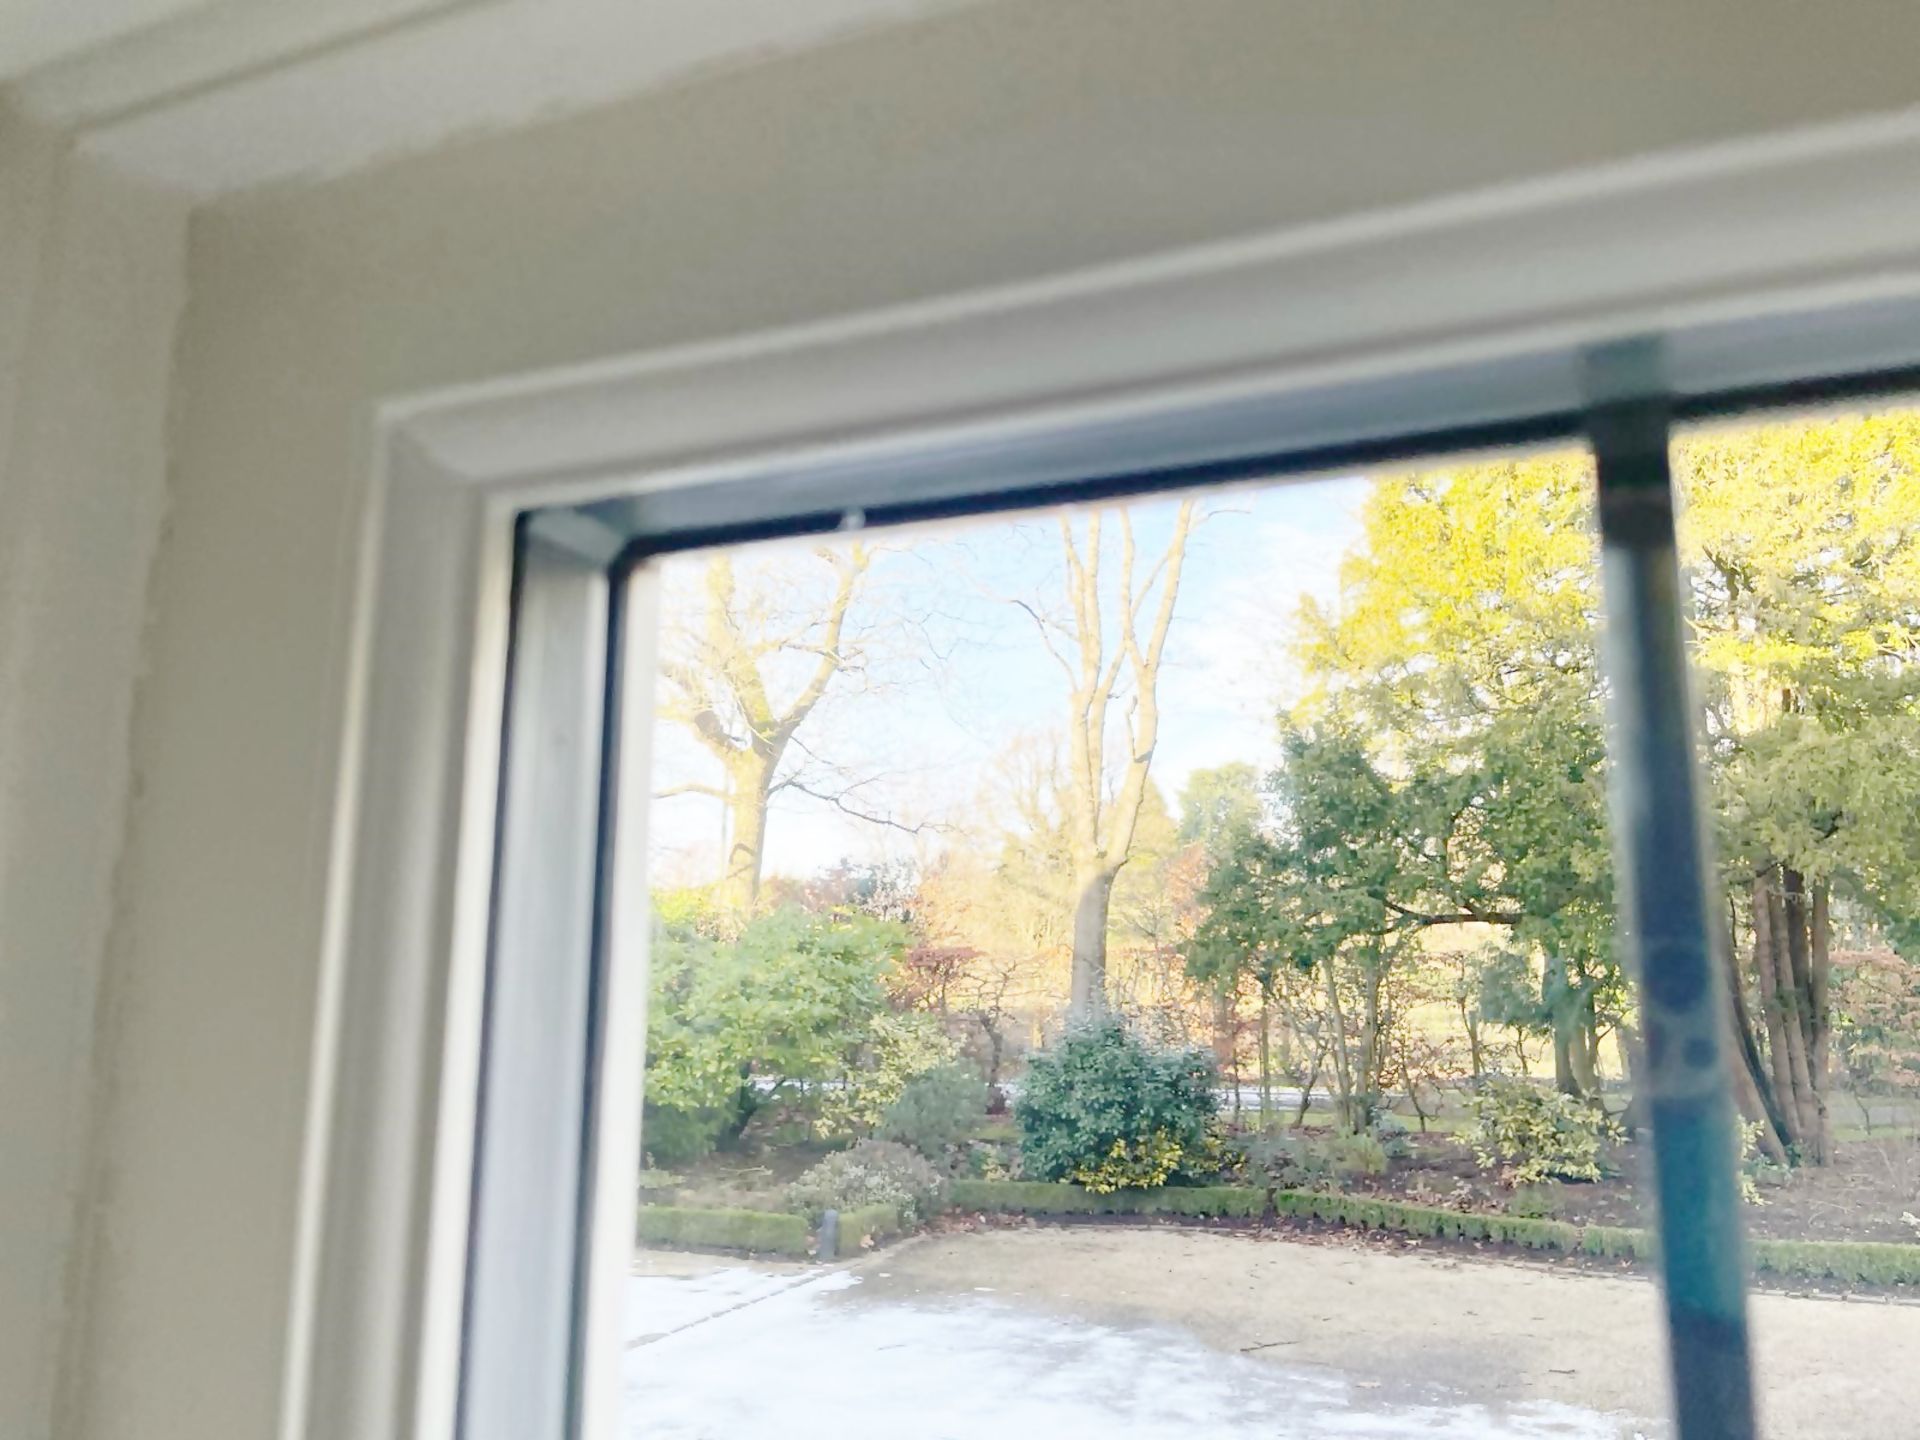 1 x Hardwood Timber Double Glazed Leaded 3-Pane Window Frame fitted with Shutter Blinds - Image 13 of 15